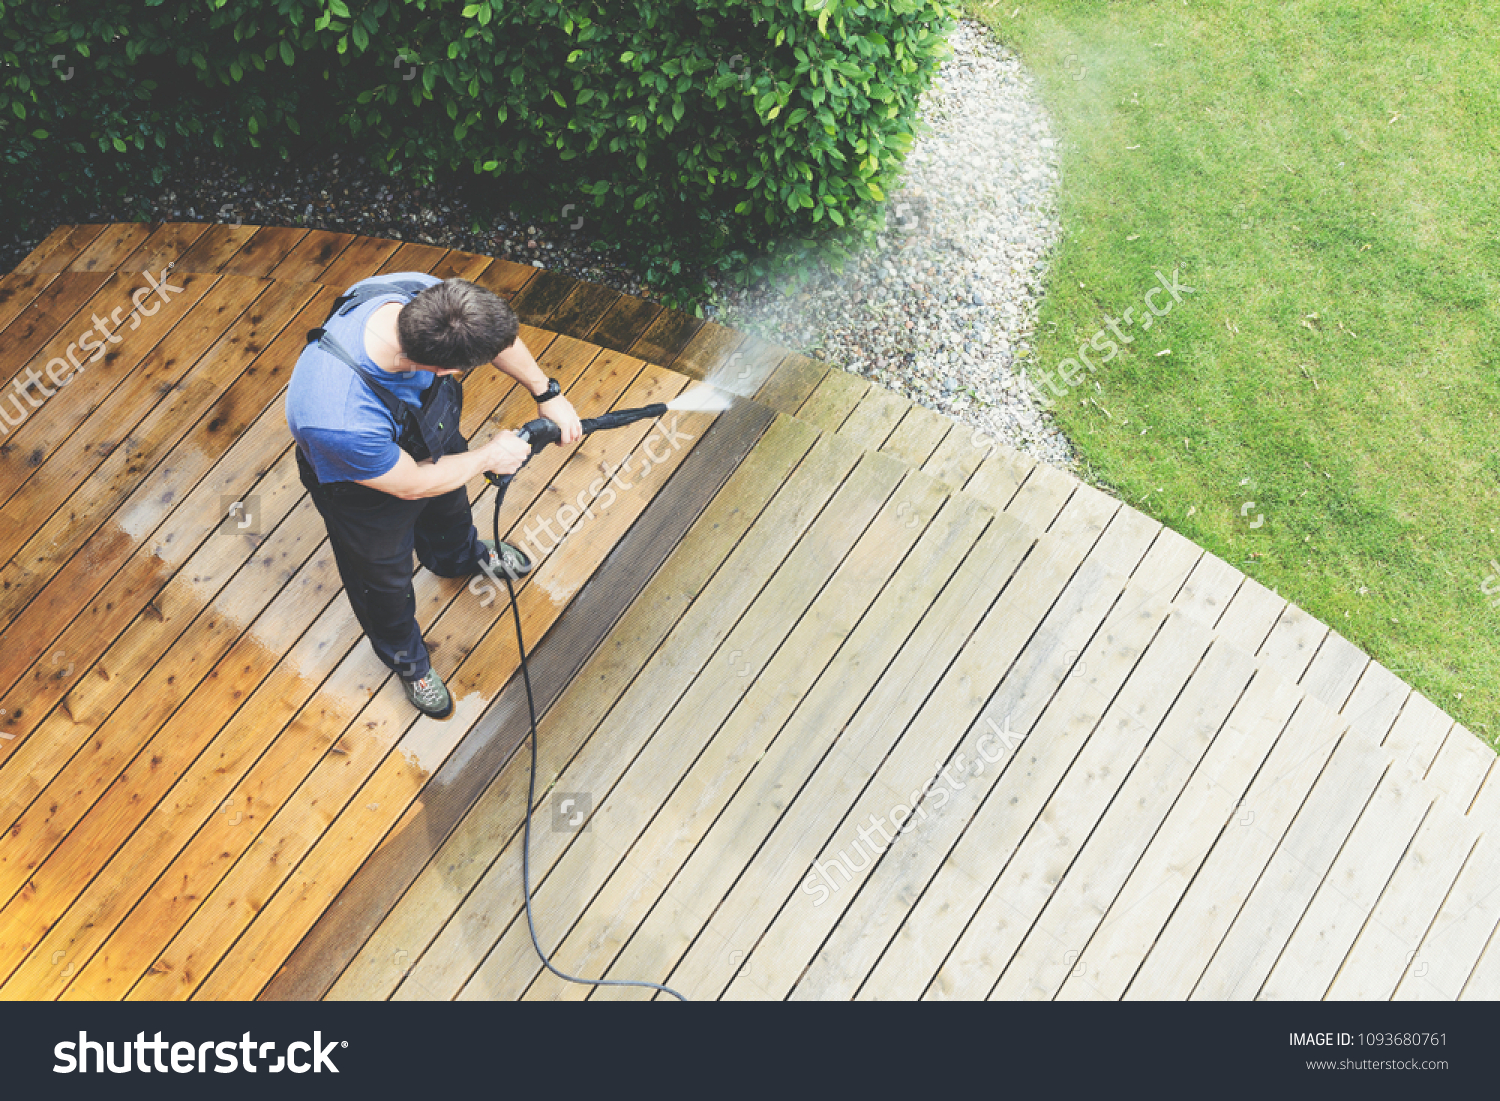 man cleaning terrace with a power washer - high water pressure cleaner on wooden terrace surface #1093680761